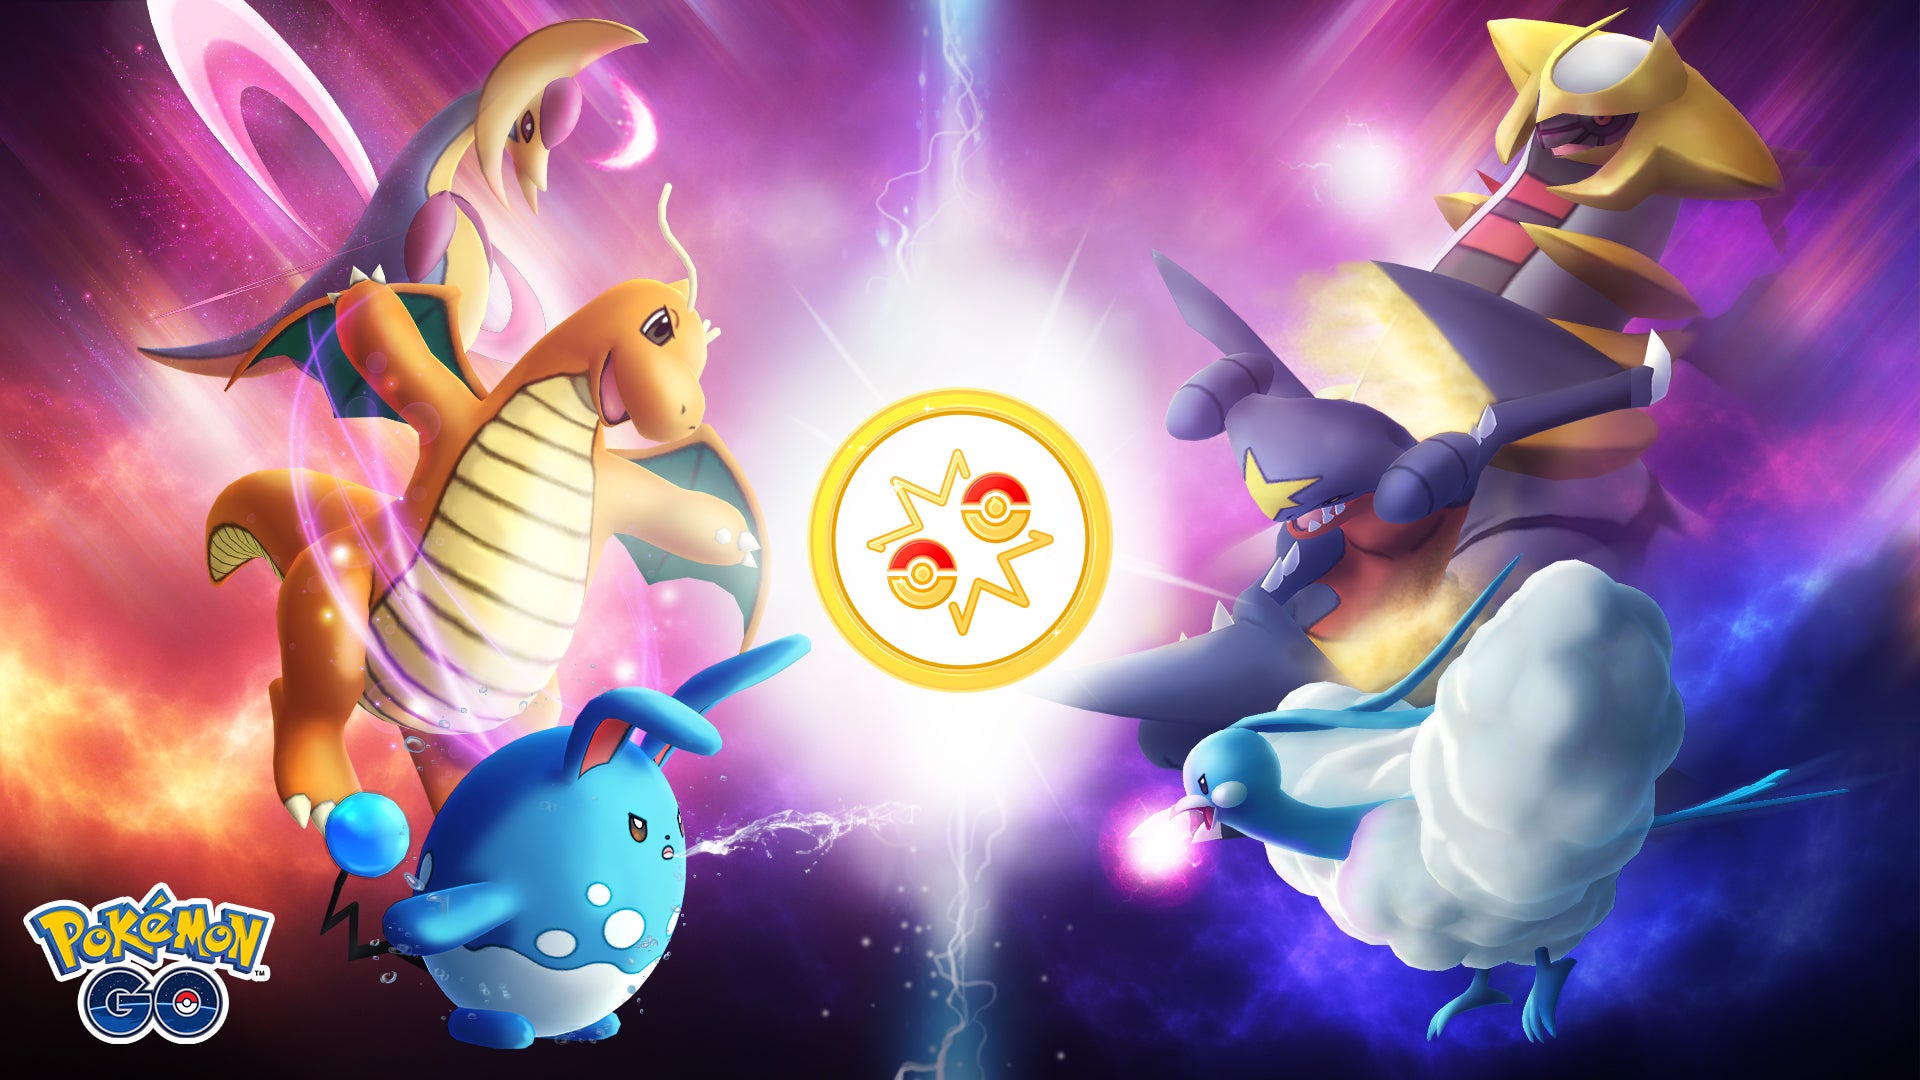 Image for Pokemon Go Battle League Season 7 dates, ranks, cups, rules, rewards, and more